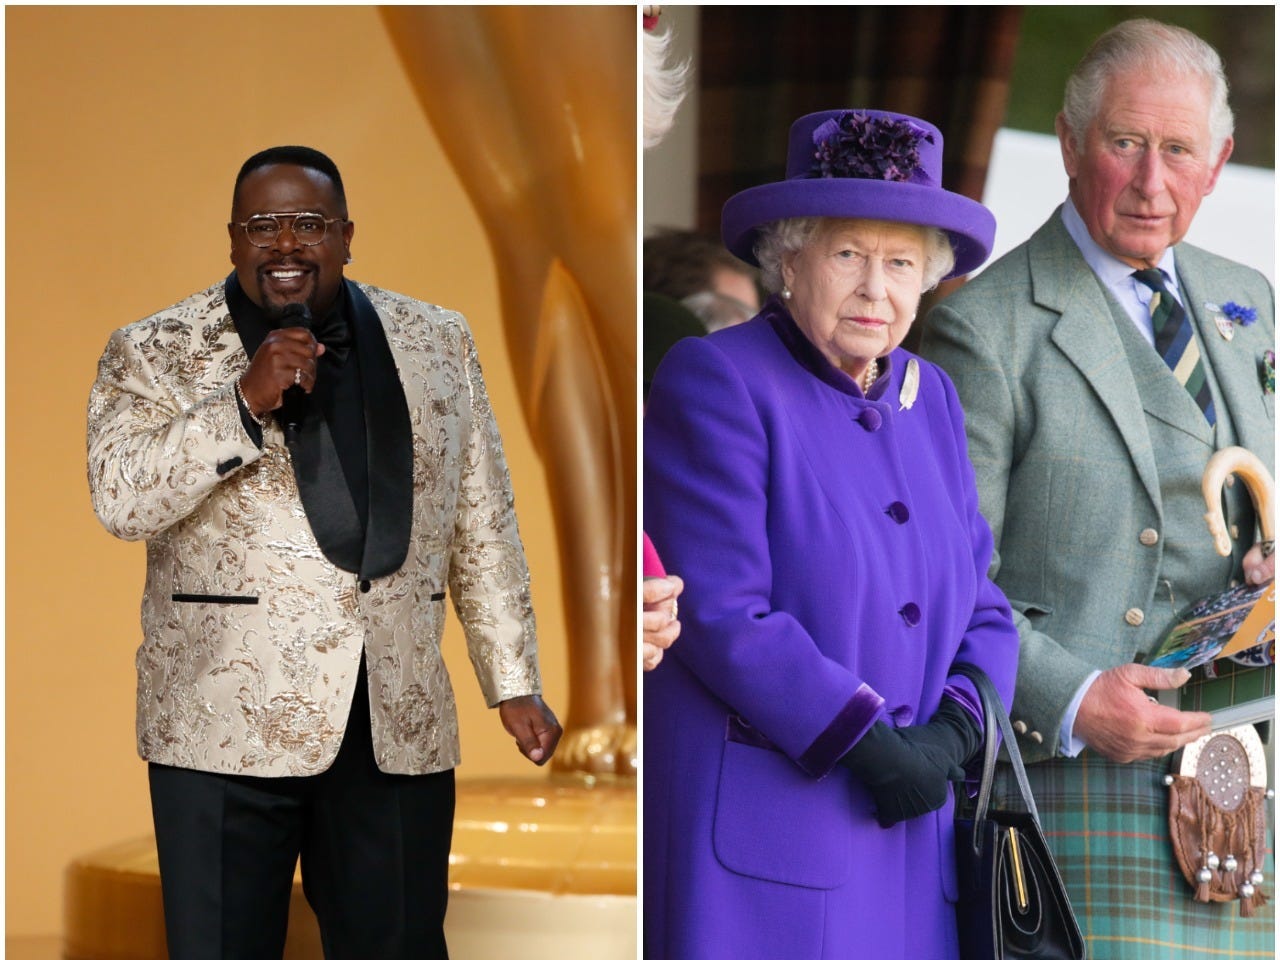 Cedric the Entertainer at the 2021 Emmys (left) side by side a photo of the Queen and Prince Charles attending the 2019 Braemar Highland Games.